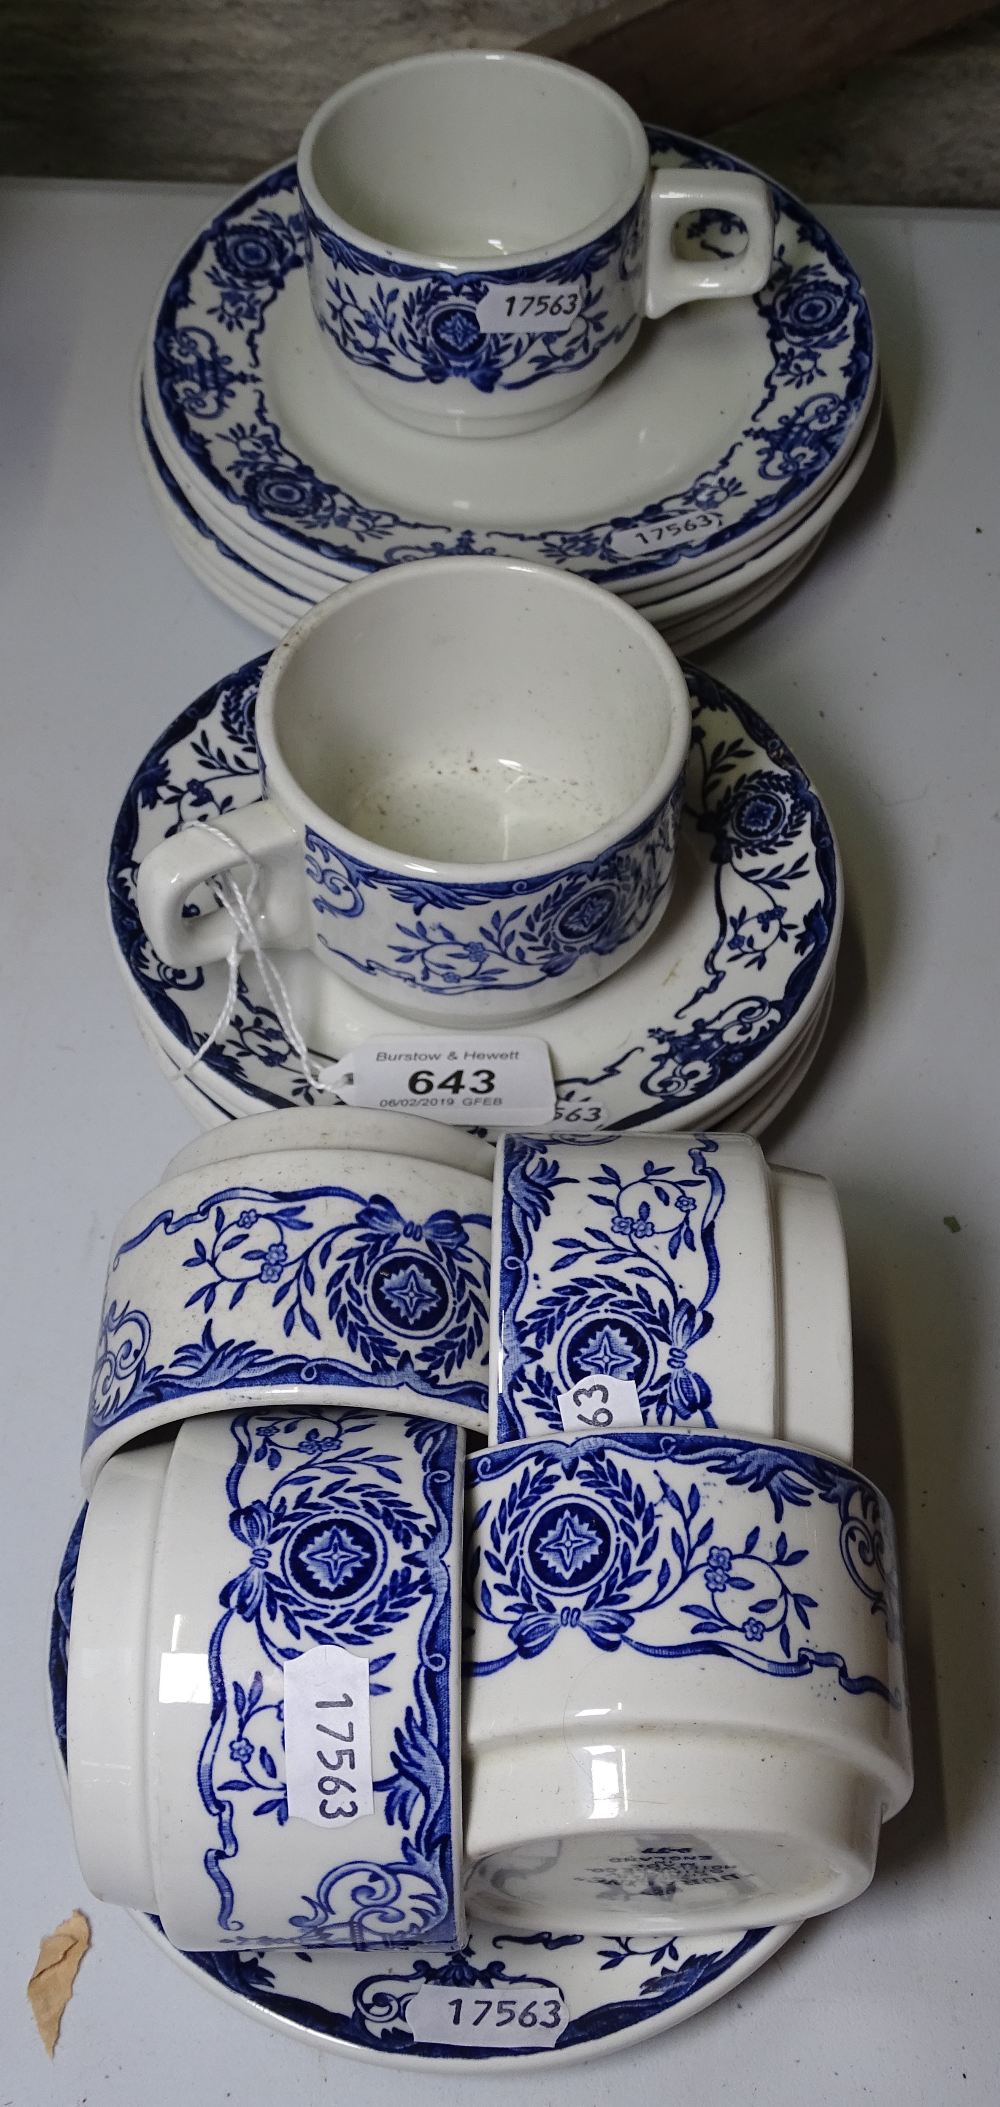 Duraline cups, saucers and plates